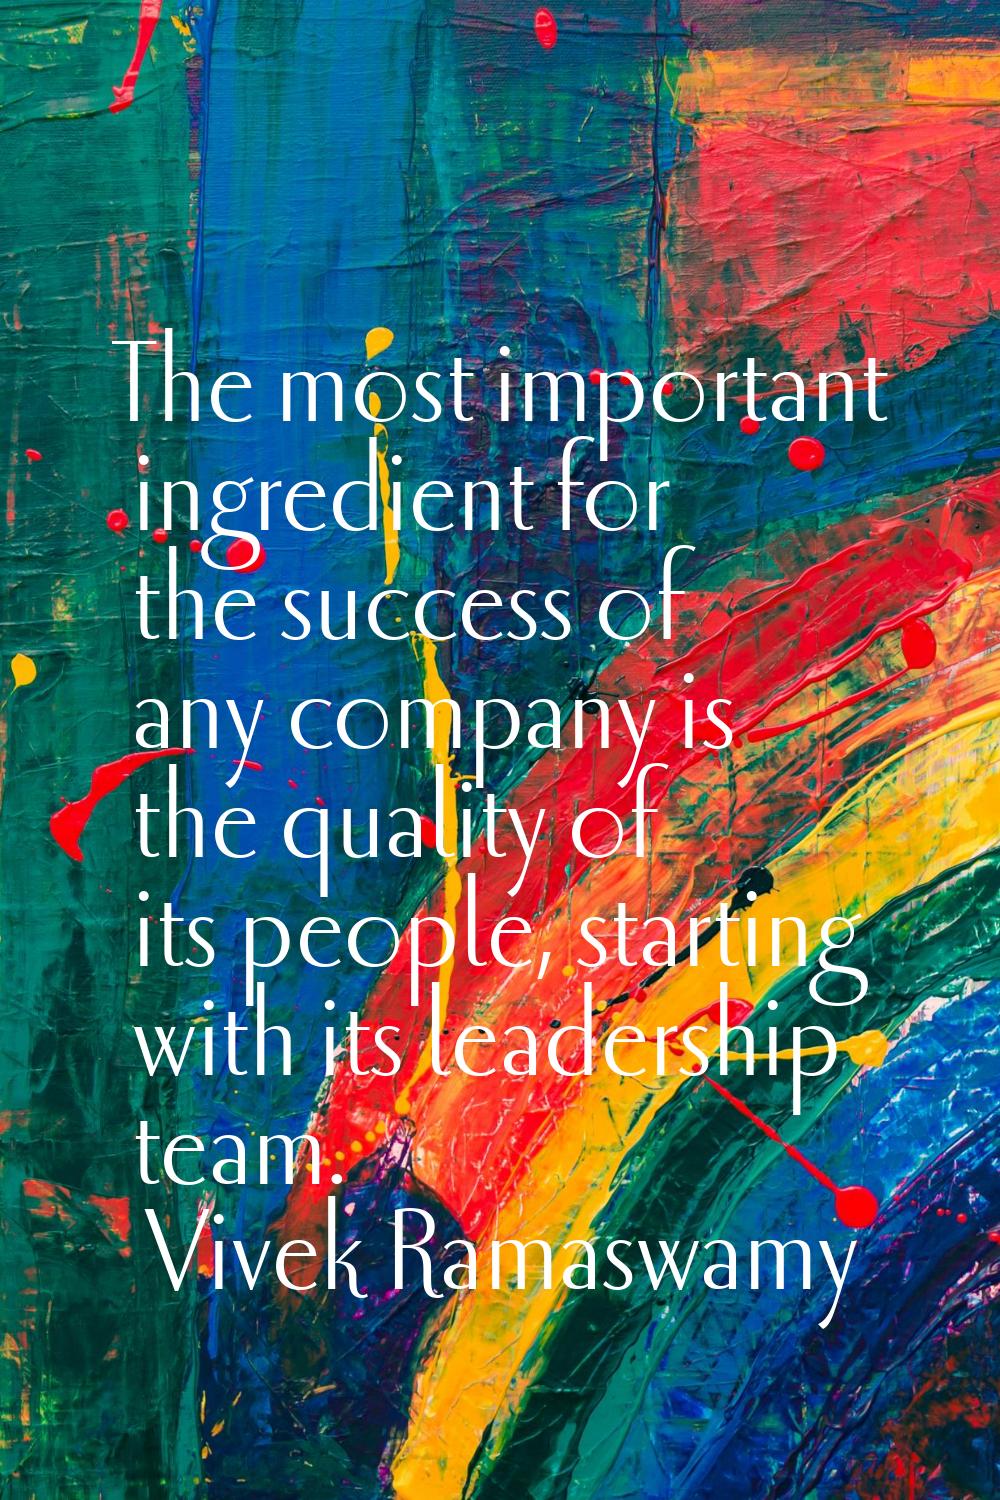 The most important ingredient for the success of any company is the quality of its people, starting